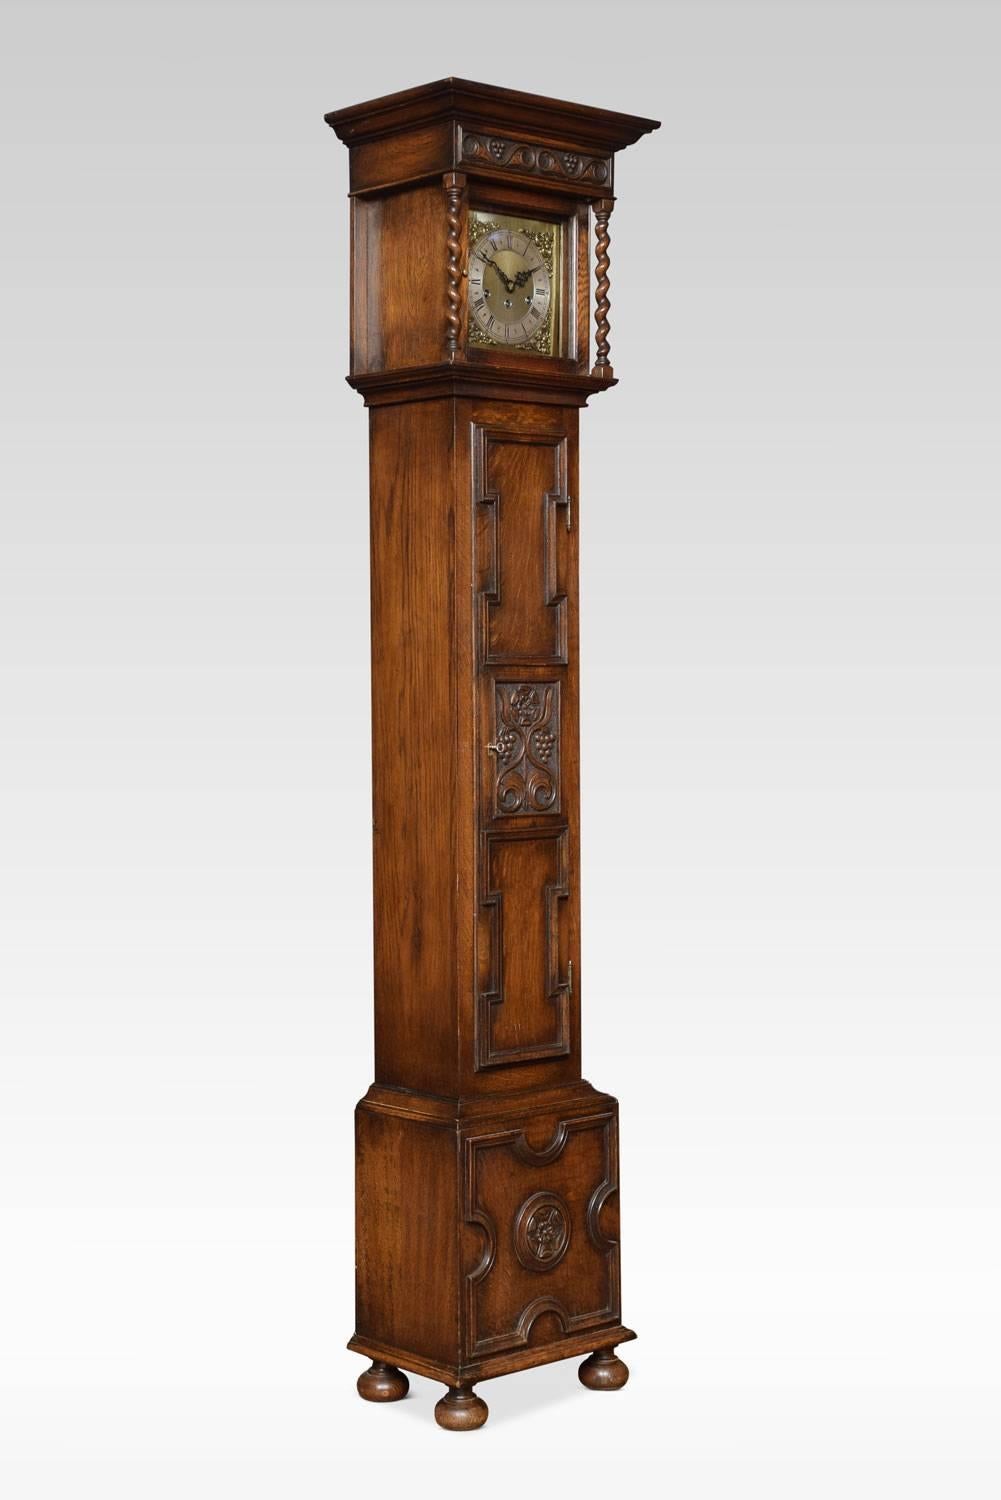 difference between grandfather and grandmother clock